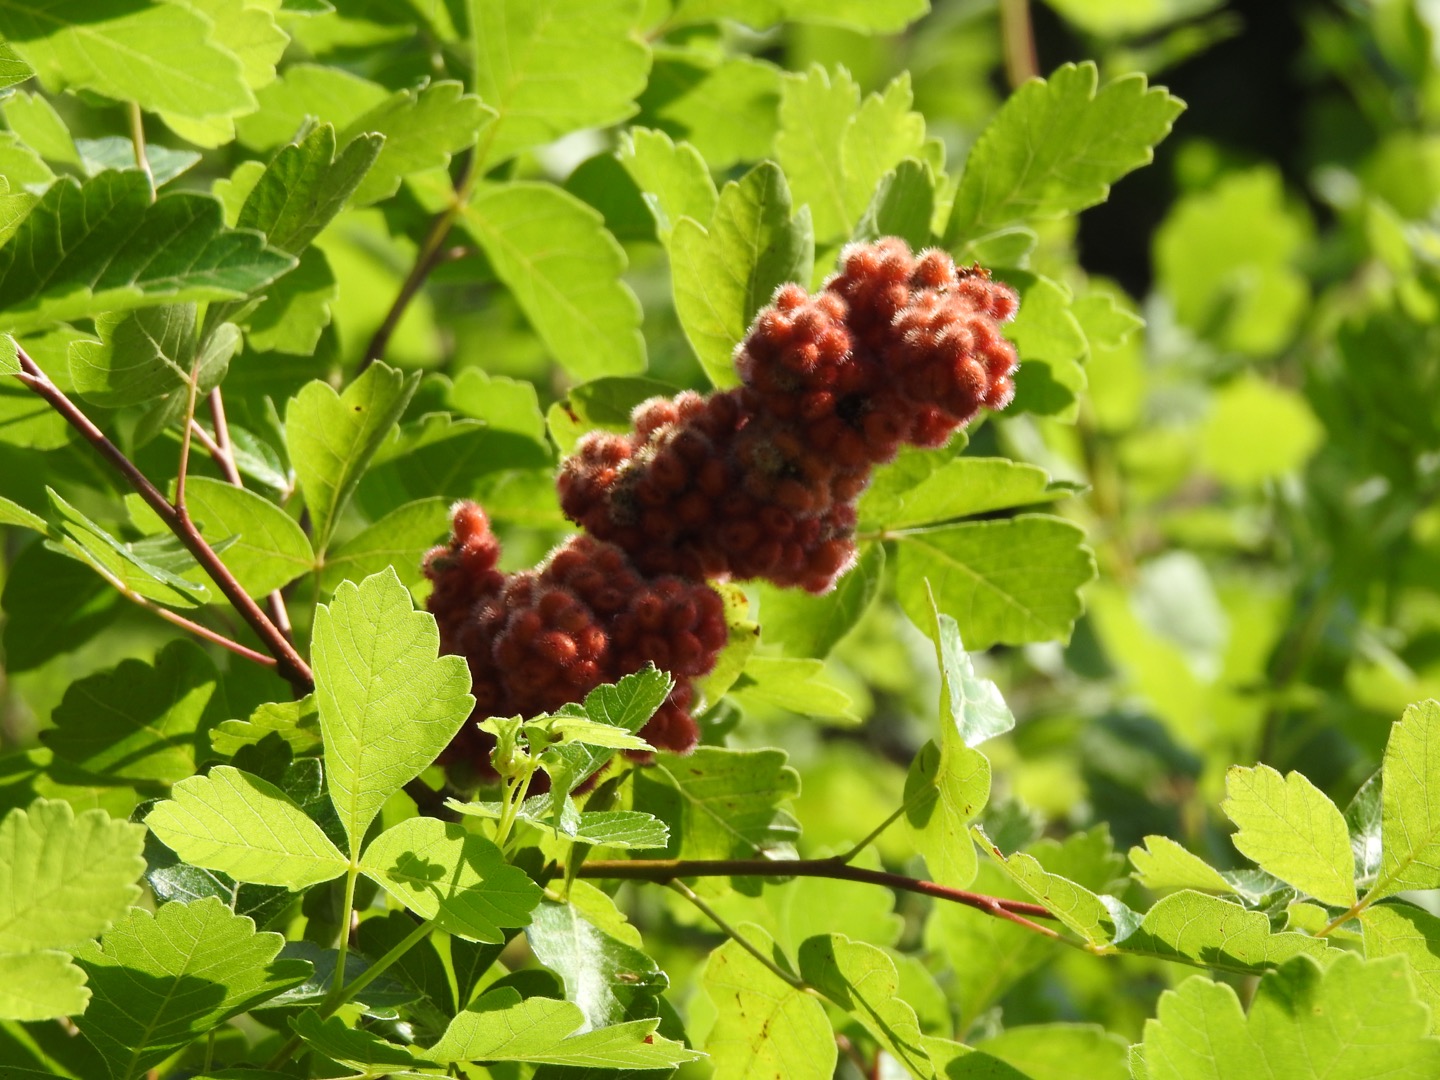 A bunch of fuzzy red ball-shaped fruits joined together in a tubelike formation. Green leaves are in the background.